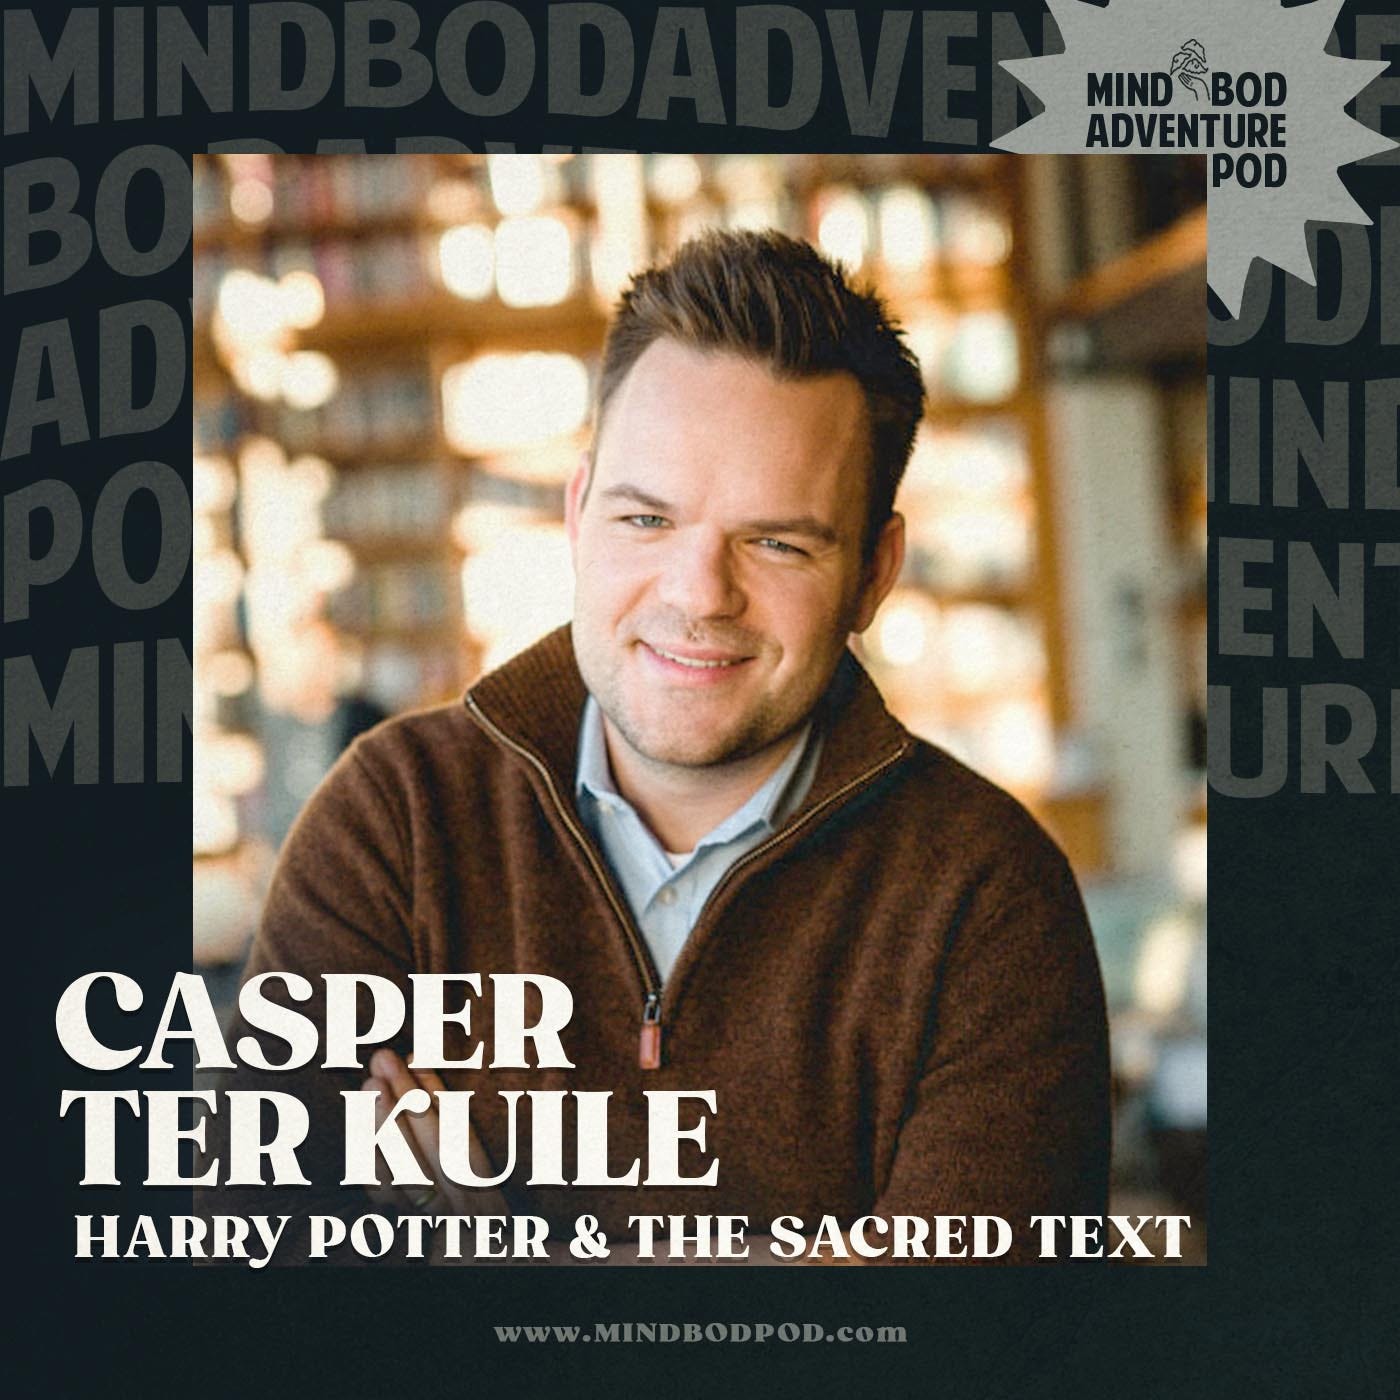 Harry Potter & The Sacred Text with Casper ter Kuile